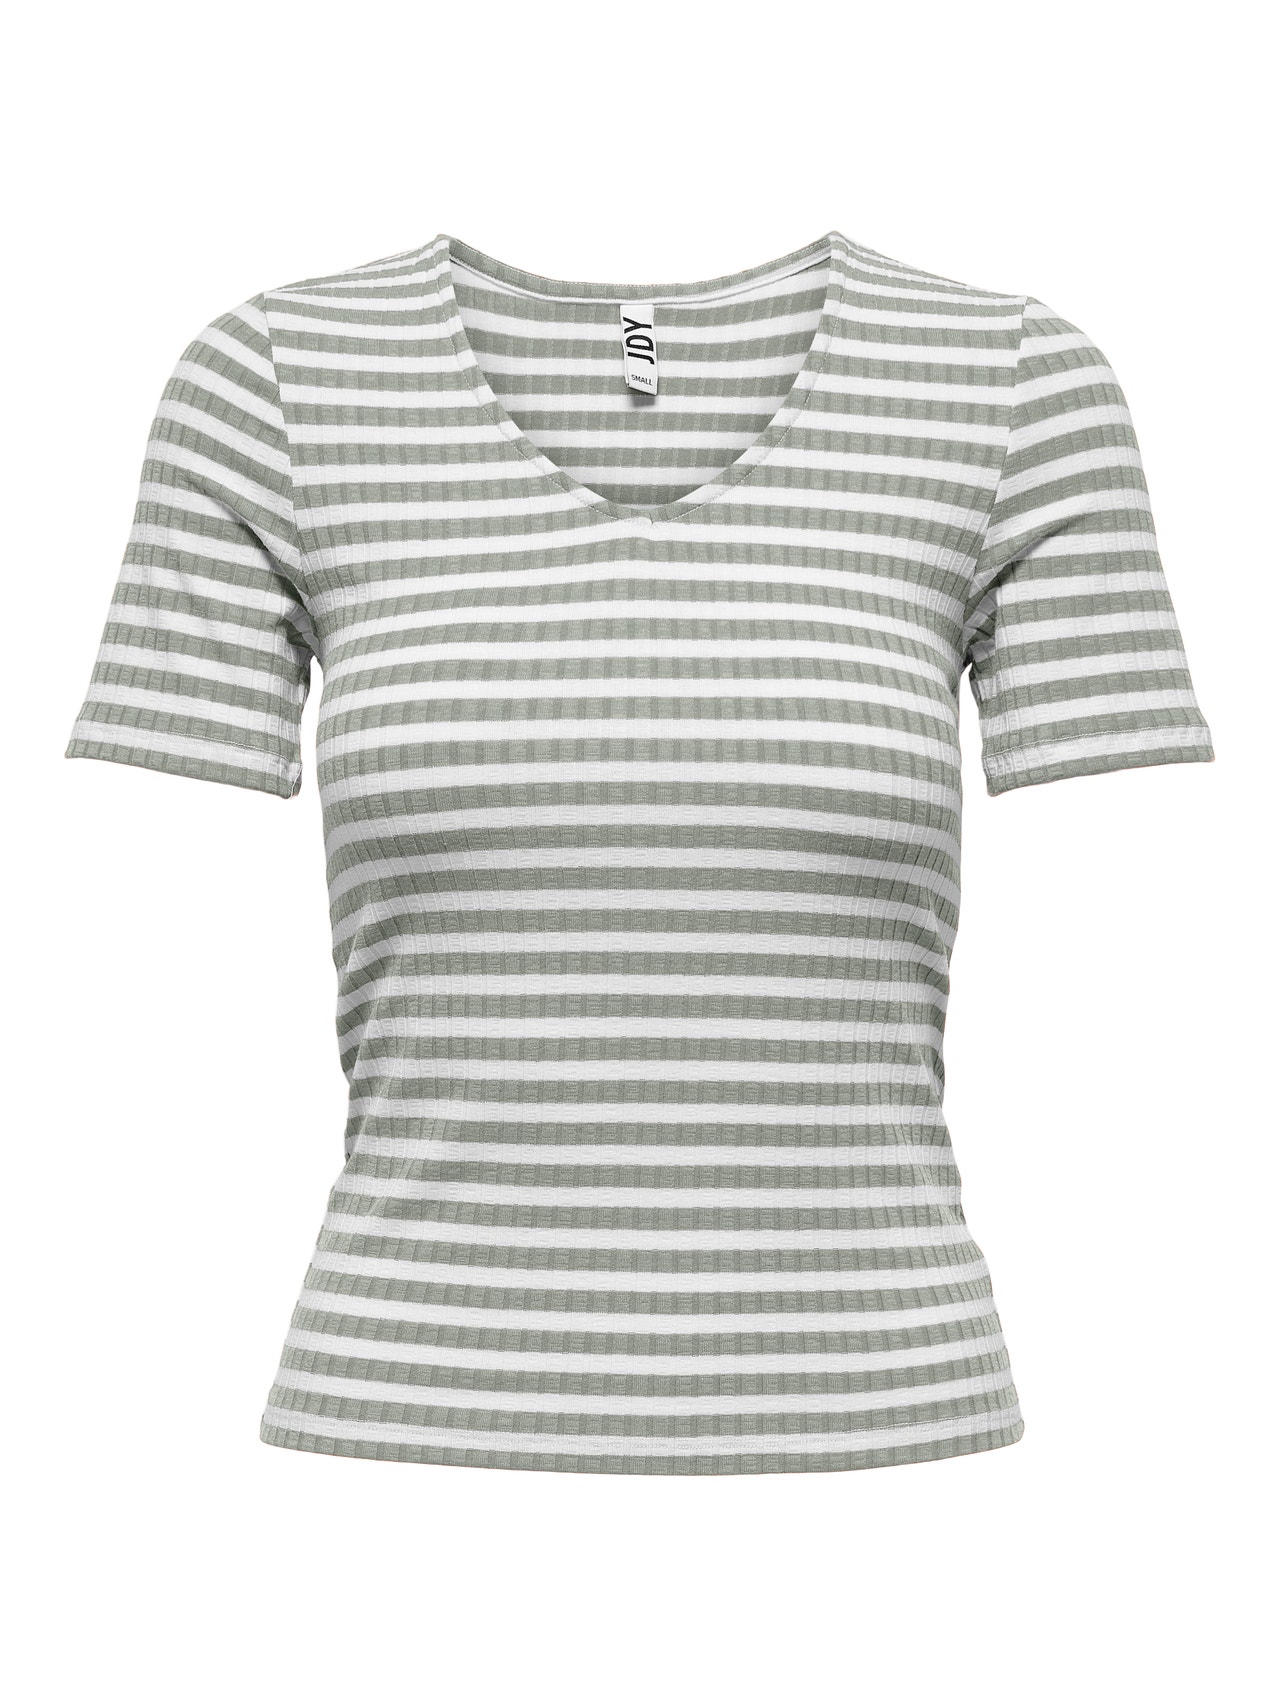 ONLY Striped V-Neck Top -Mineral Gray - 15253481